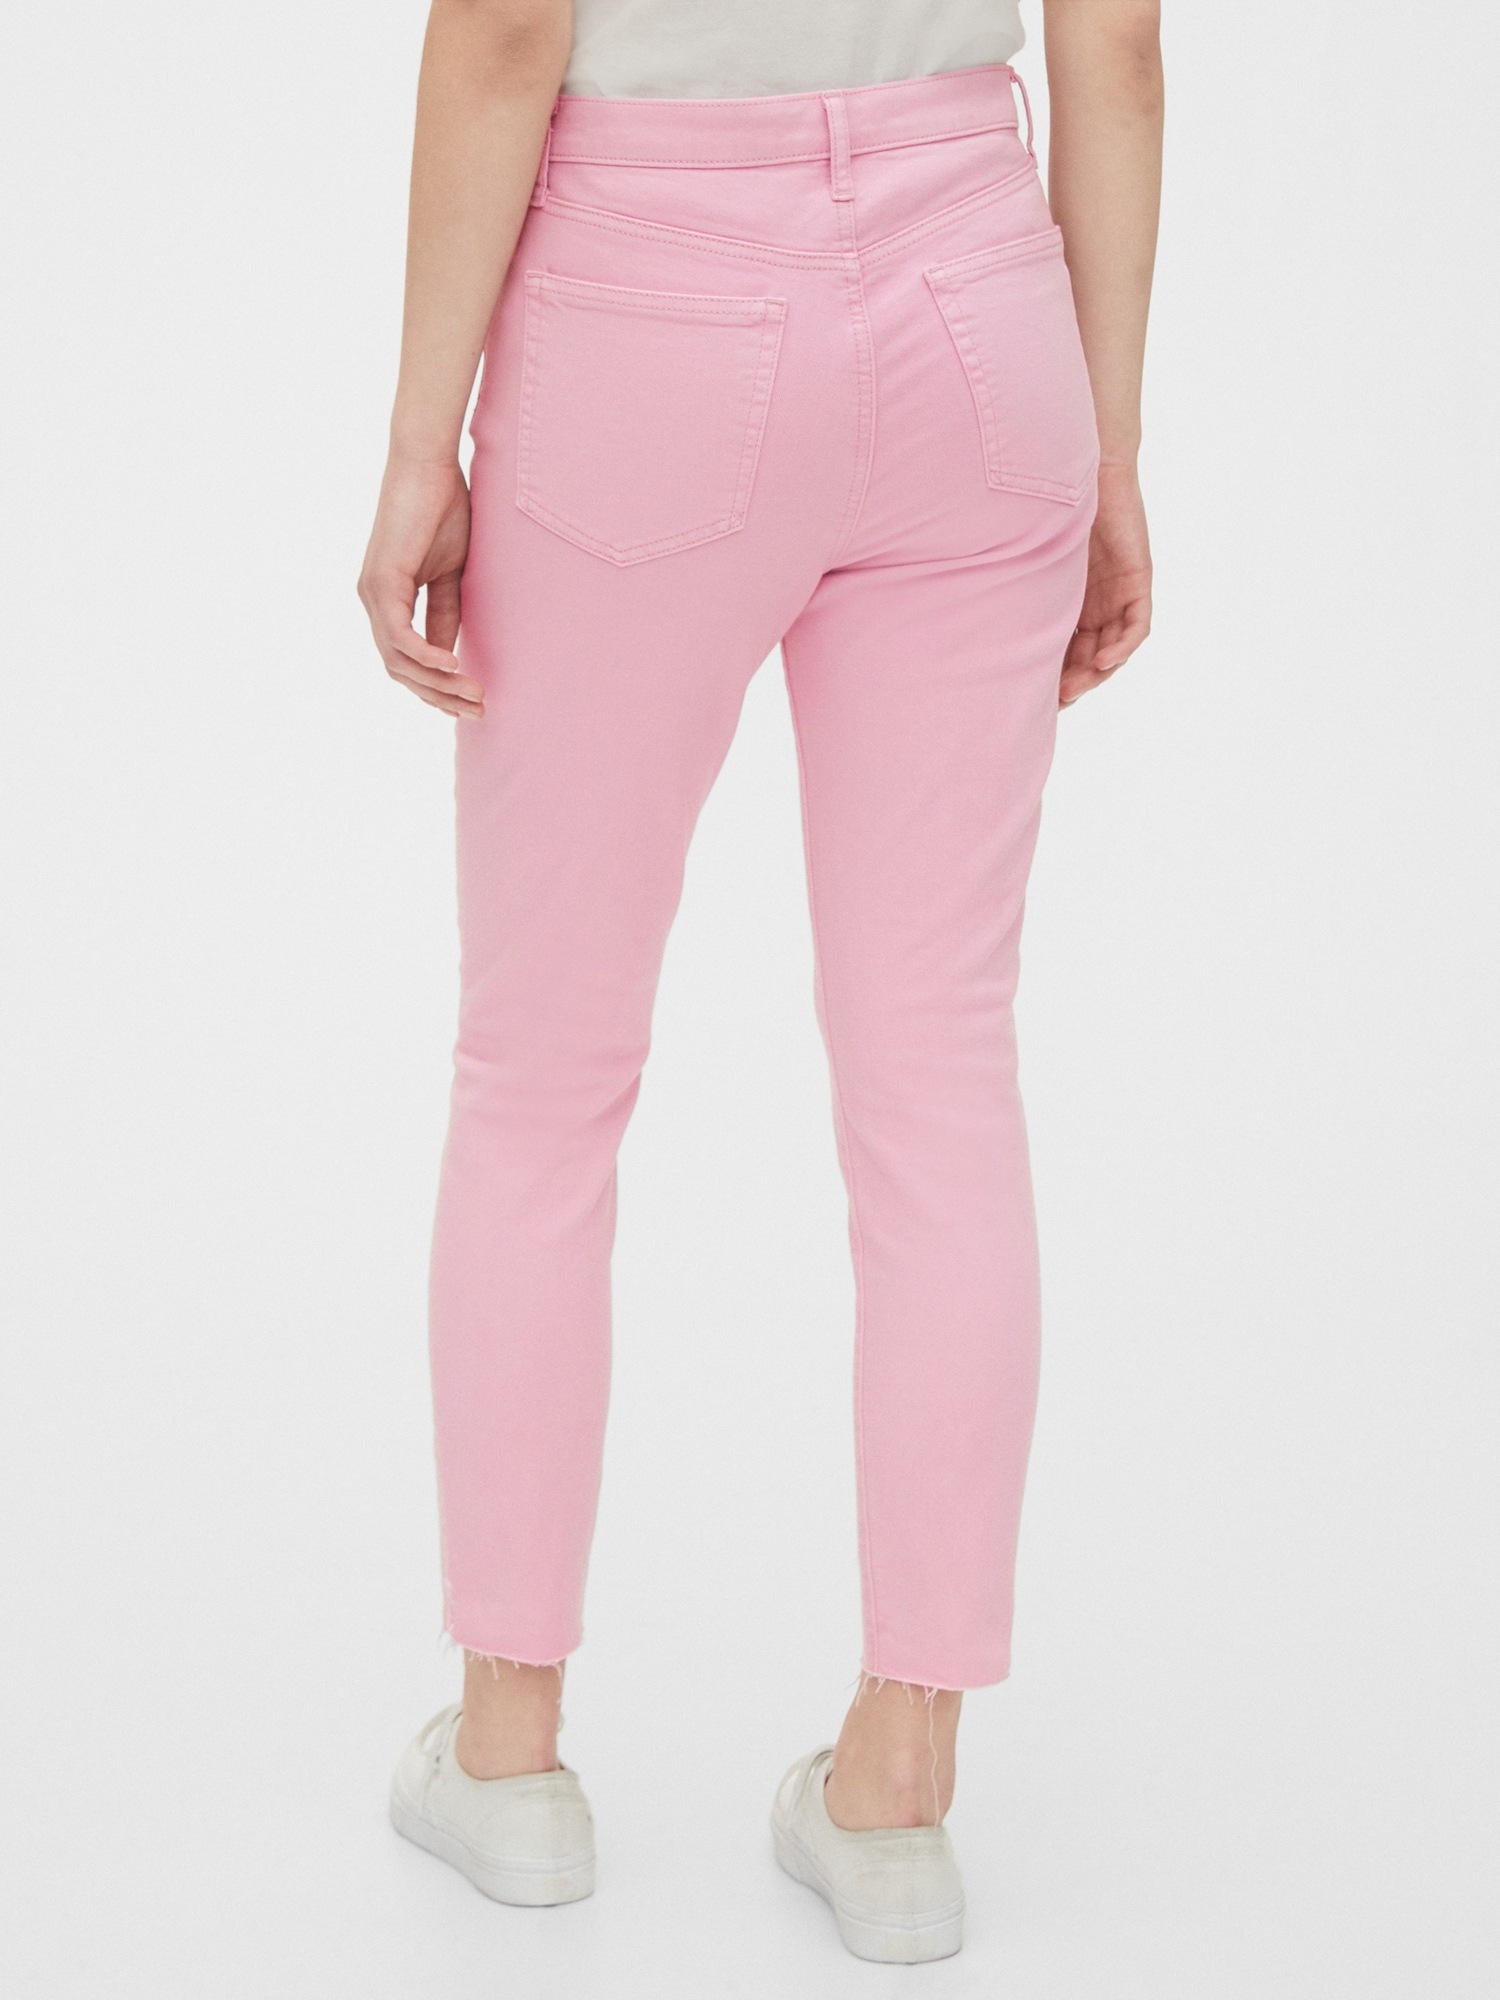 gap high rise true skinny ankle jeans